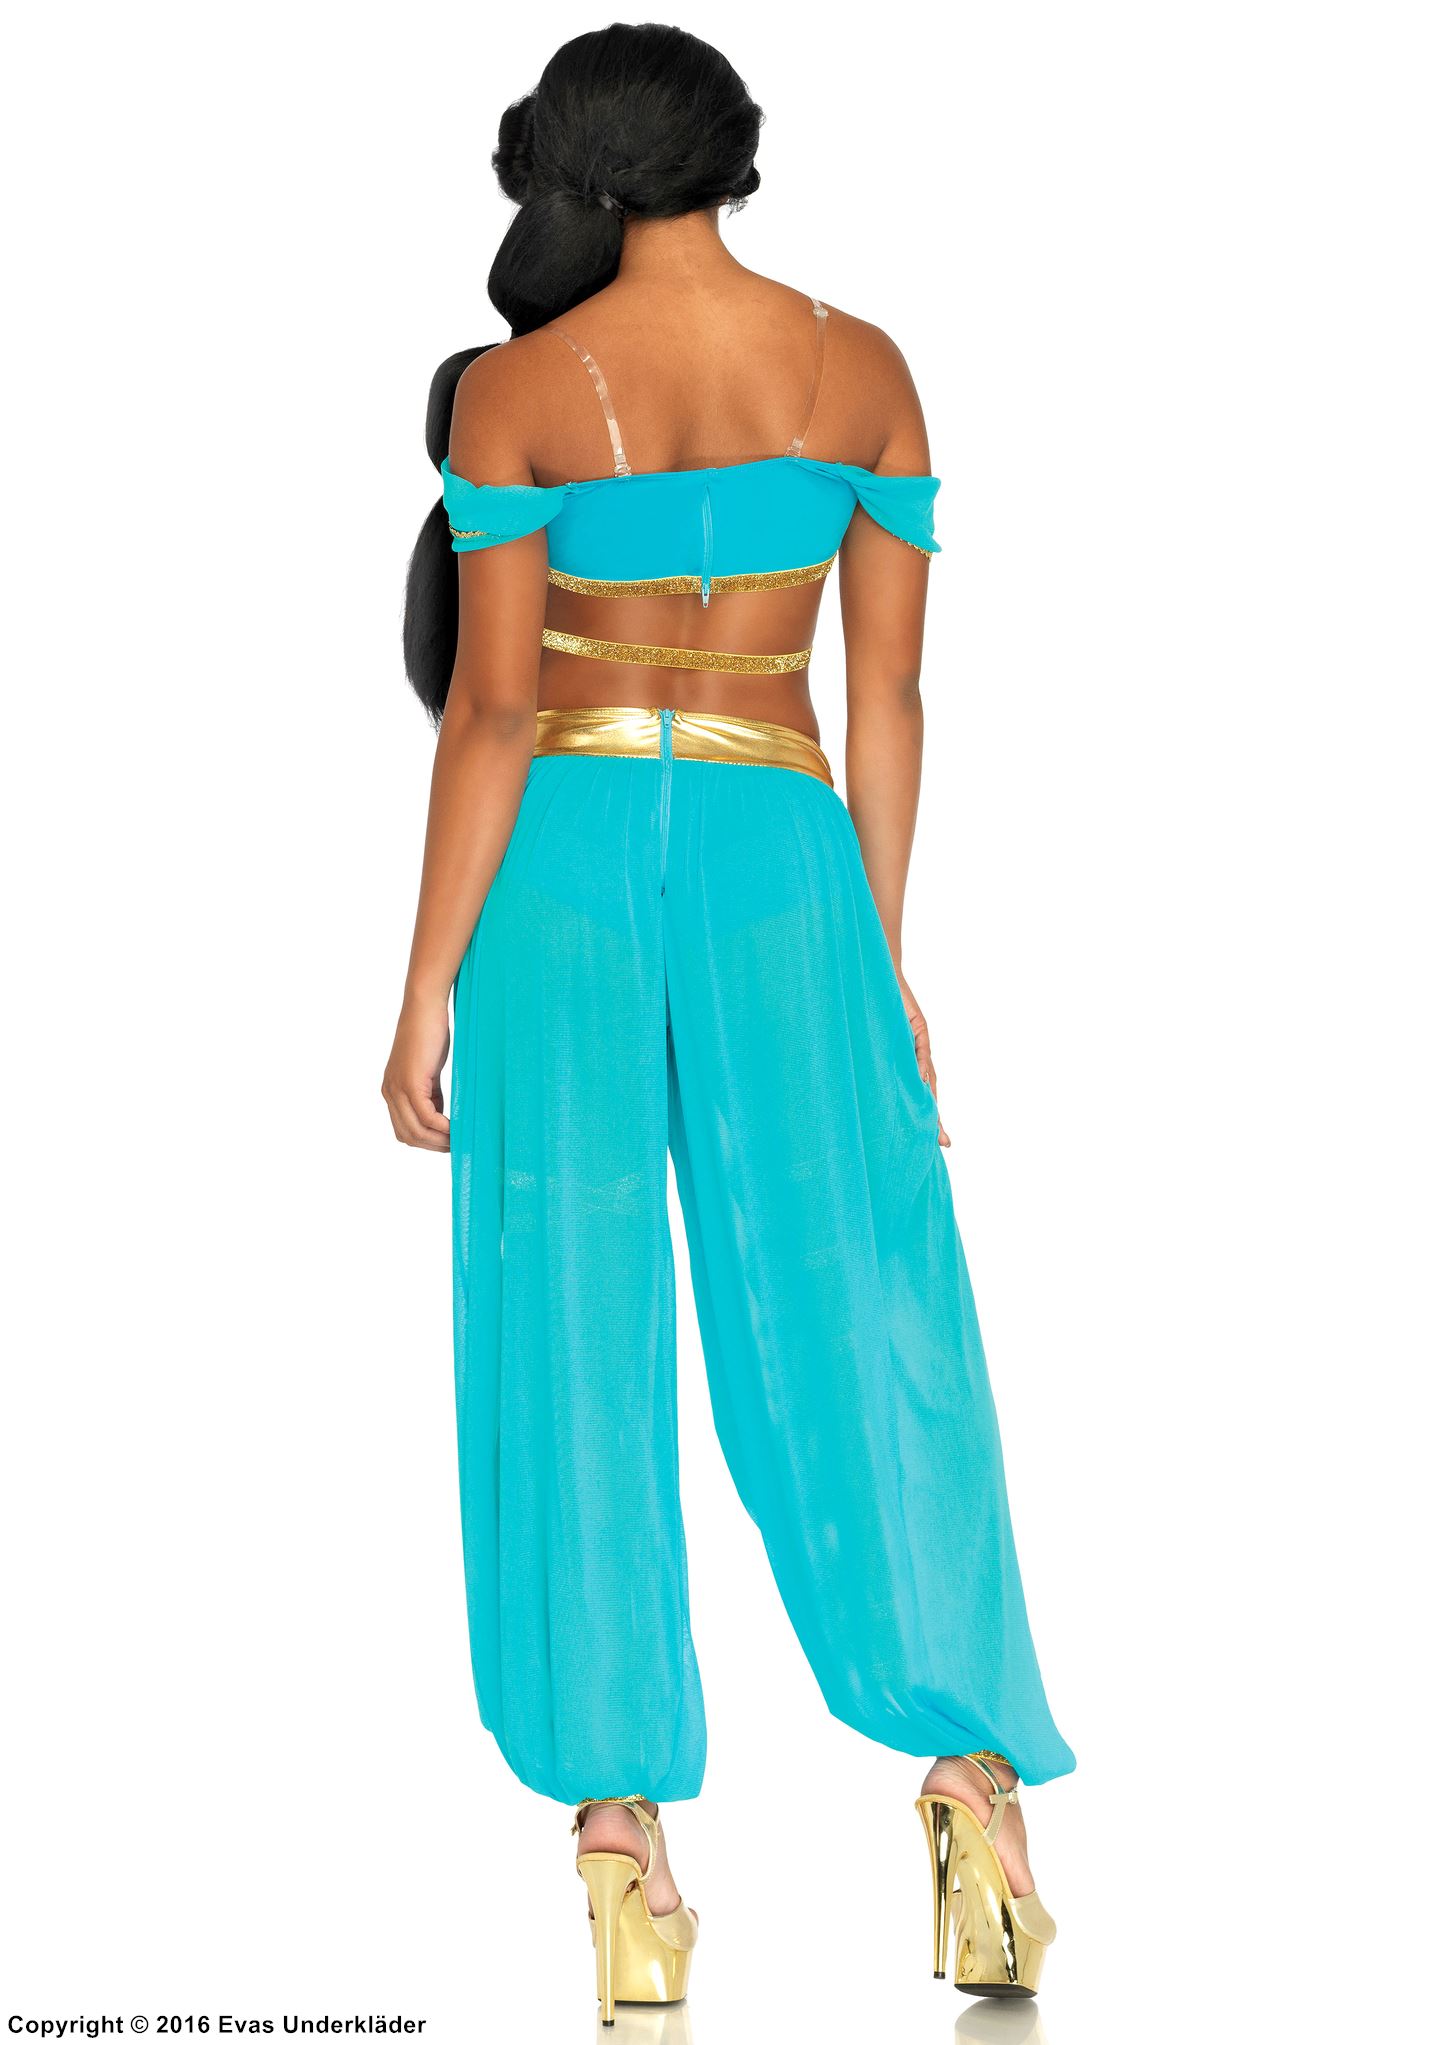 Princess Jasmine from Aladdin, costume top and pants, lace, rhinestones, crossing straps, off shoulder